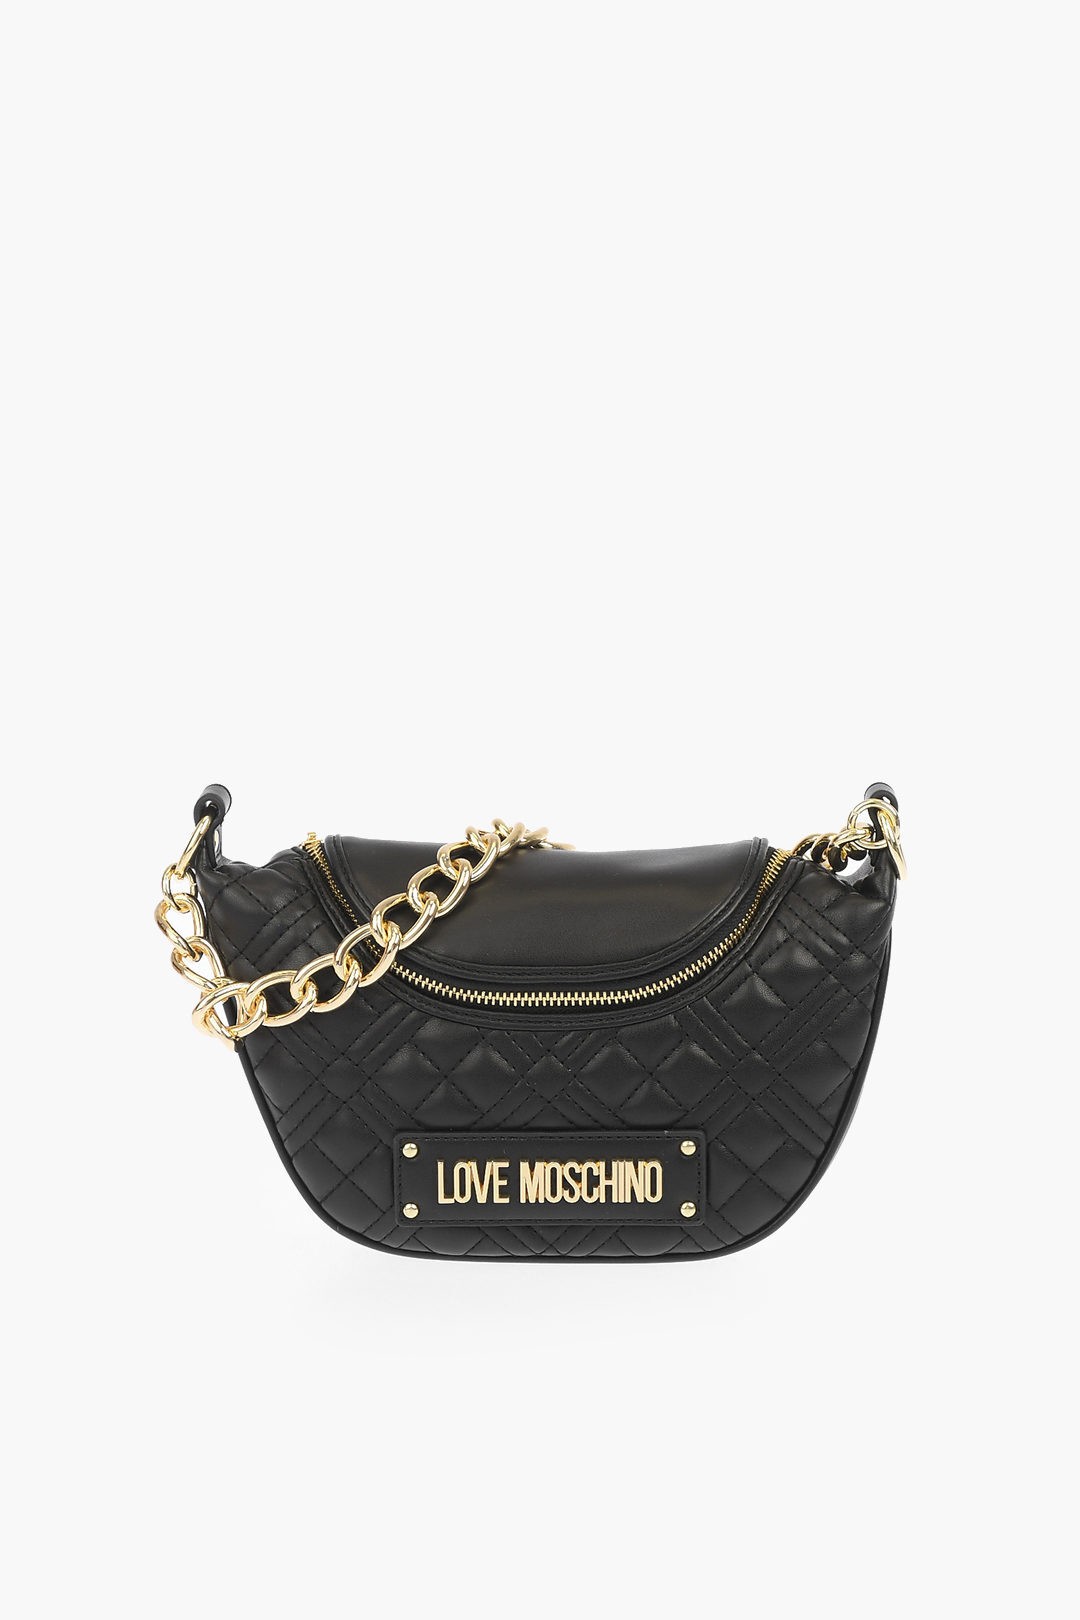 MOSCHINO モスキーノ Black バッグ JC4311PP0ELA0000 レディース LOVE QUILTED FAUX LEATHER  MINI SHOULDER STRAP WITH GOLDEN DE 【関税・送料無料】【ラッピング無料】 dk -  thestyledpress.com